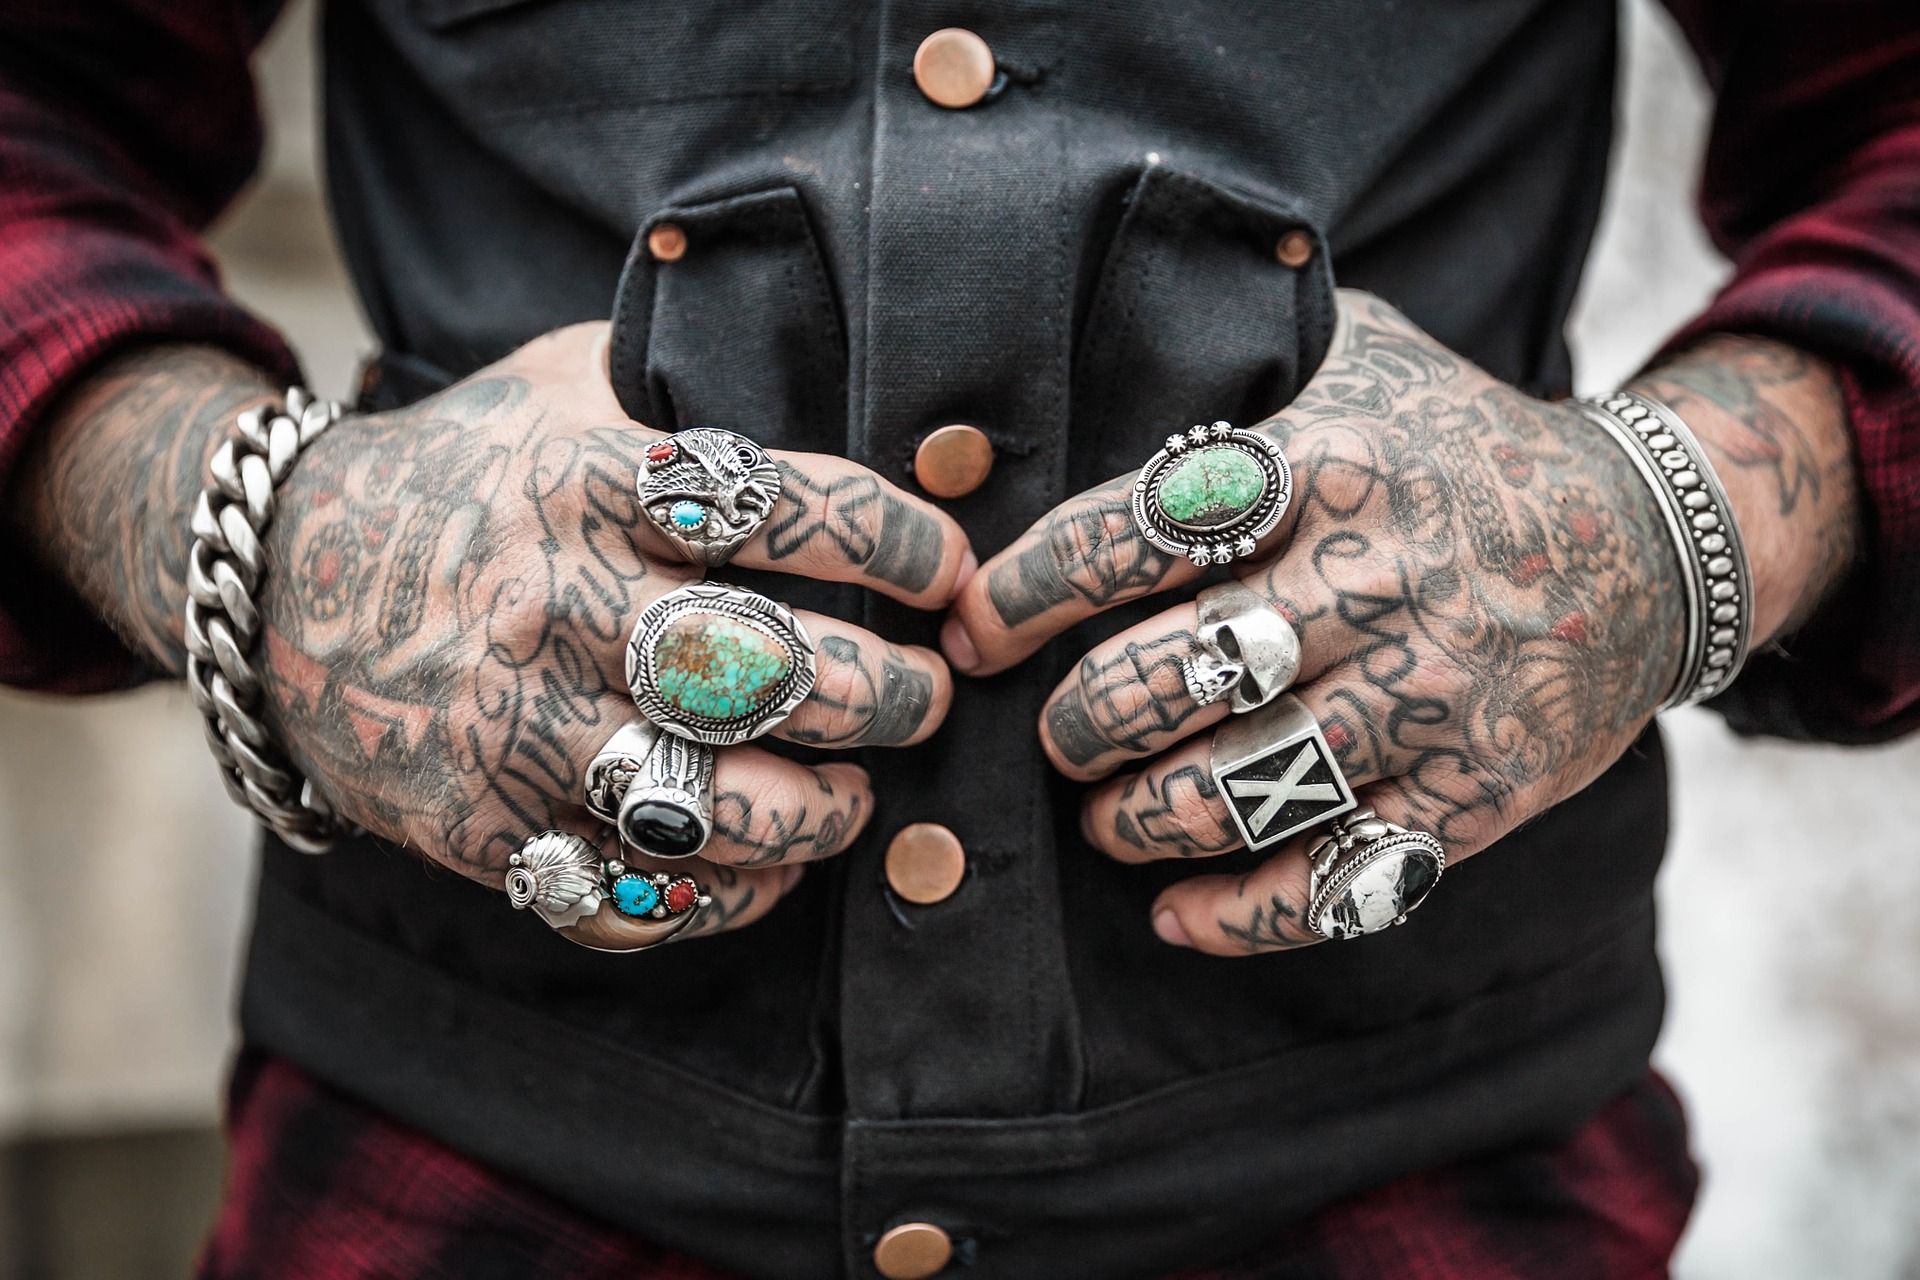 Tattoos Affect Your Health: Long-Term Side Effects Ink Has On Your Immune System And Disease Risk